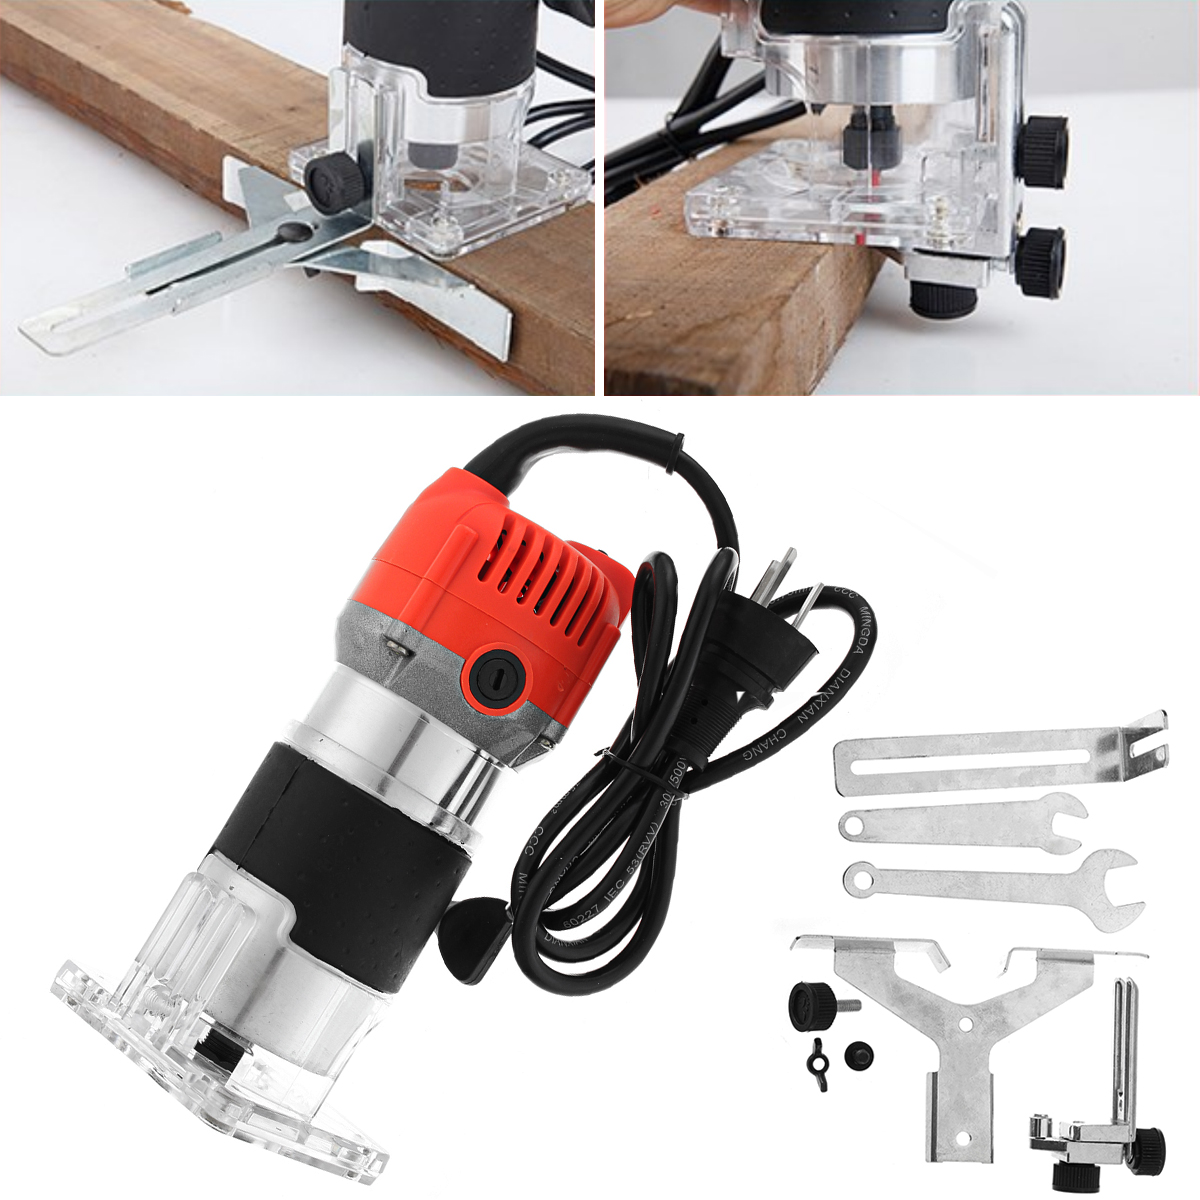 Raitool™ 800W 30000RPM Variable Speed Electric Hand Trimmer Wood Laminate Palm Router 11